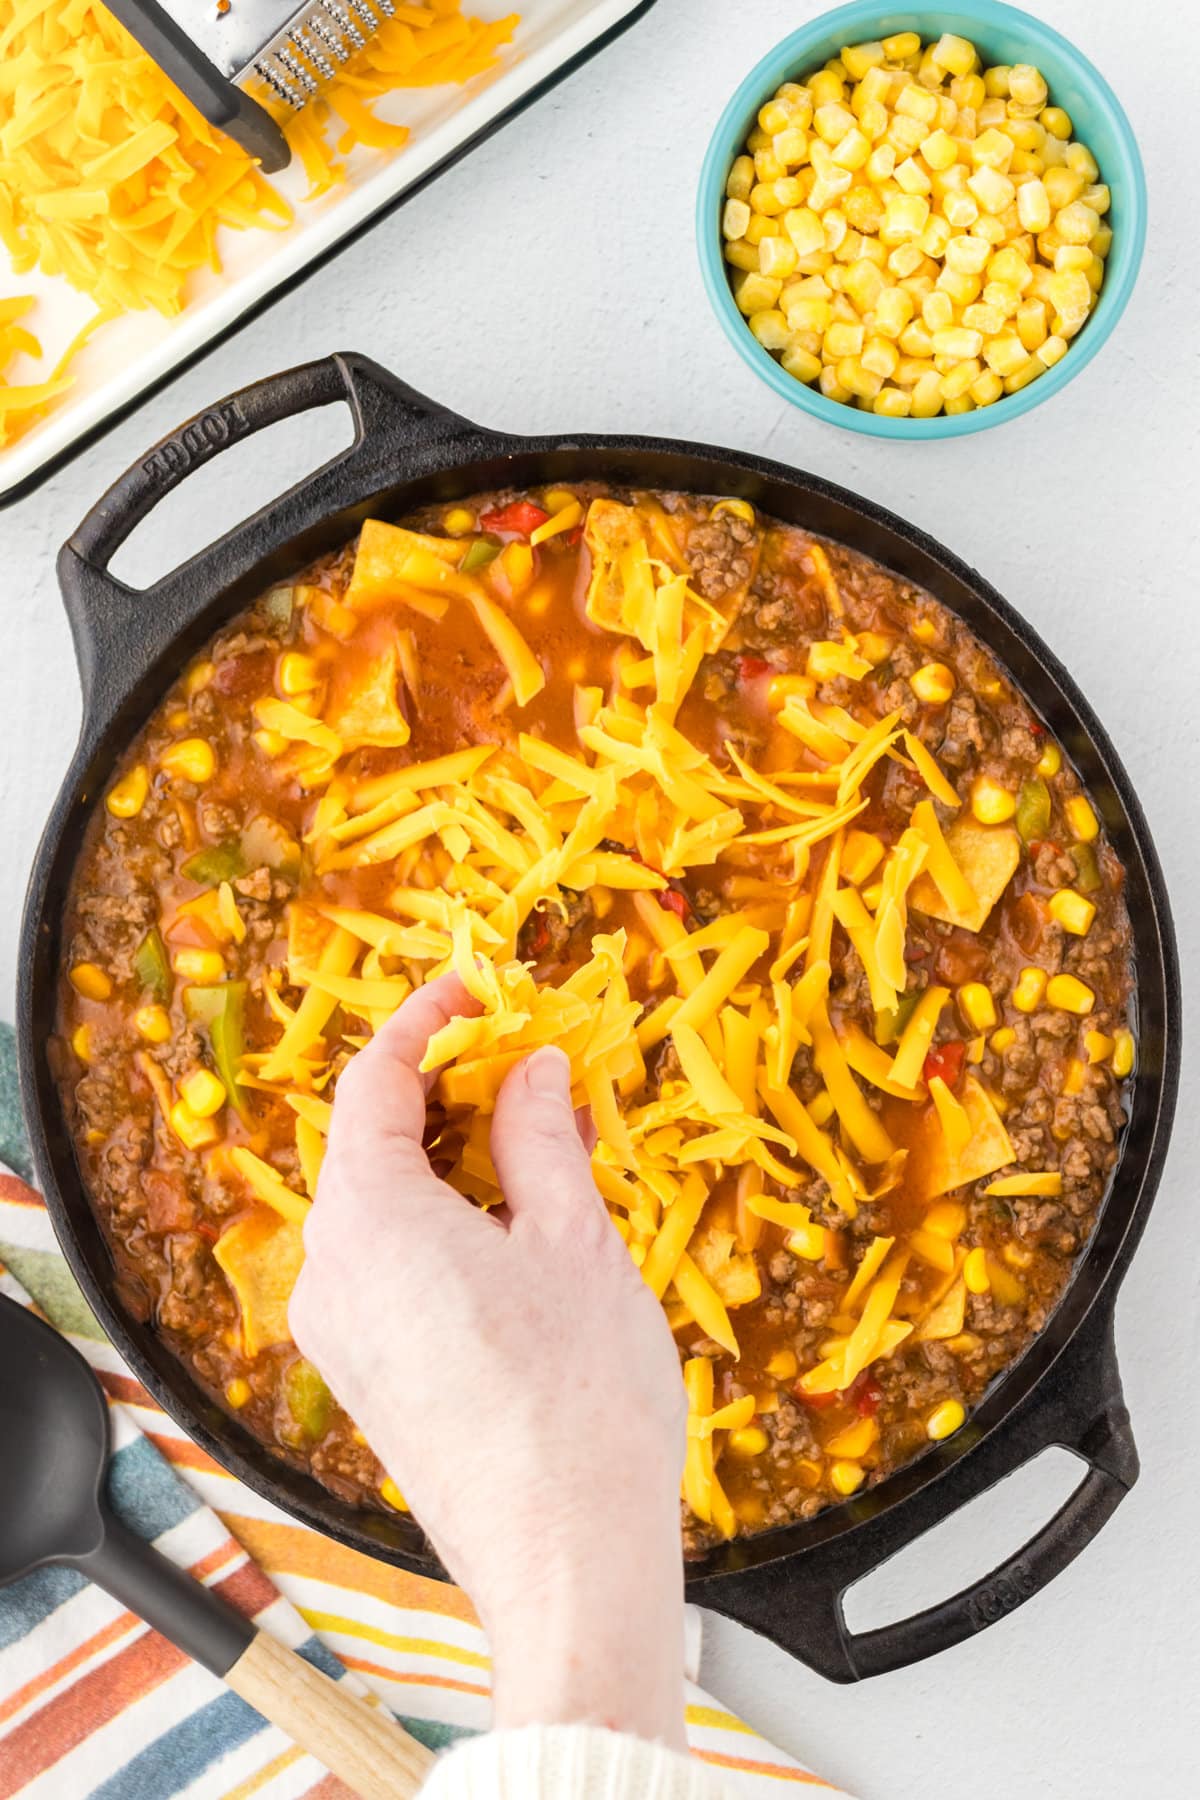 Sprinkling cheese over the cooked skillet beef tamale mixture.